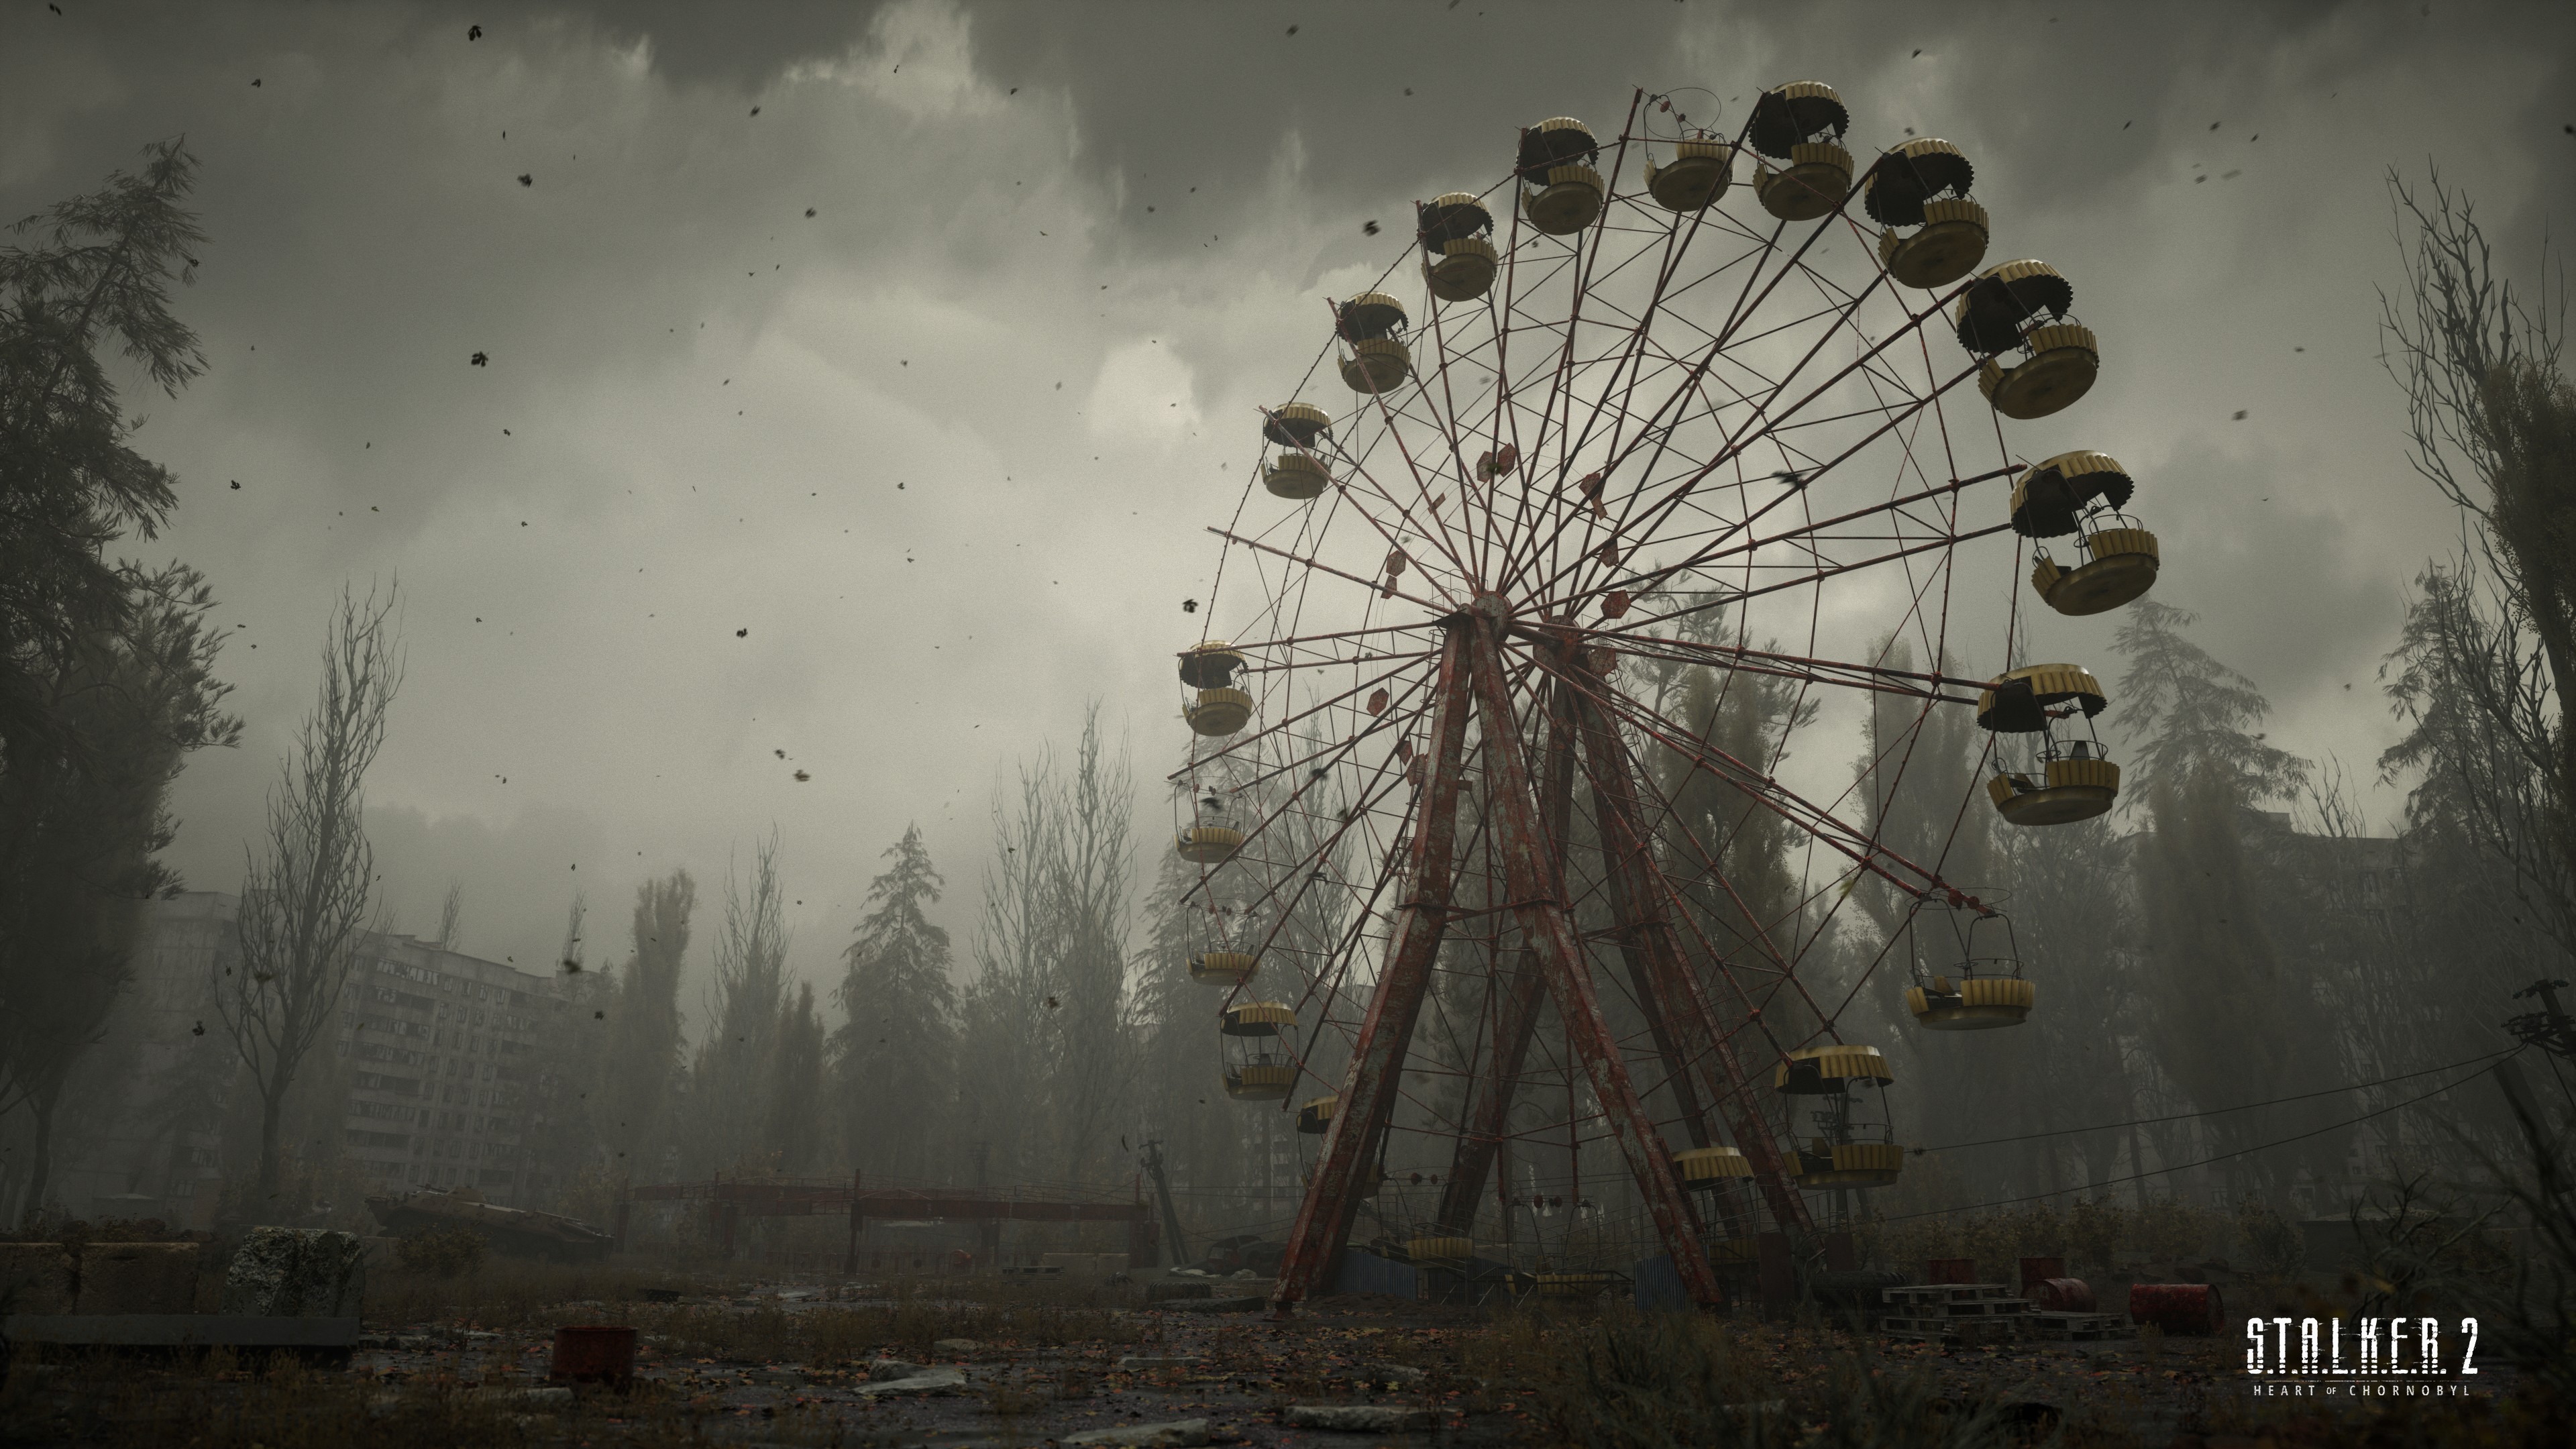 Enter the Zone When S.T.A.L.K.E.R. 2: Heart of Chernobyl Launches